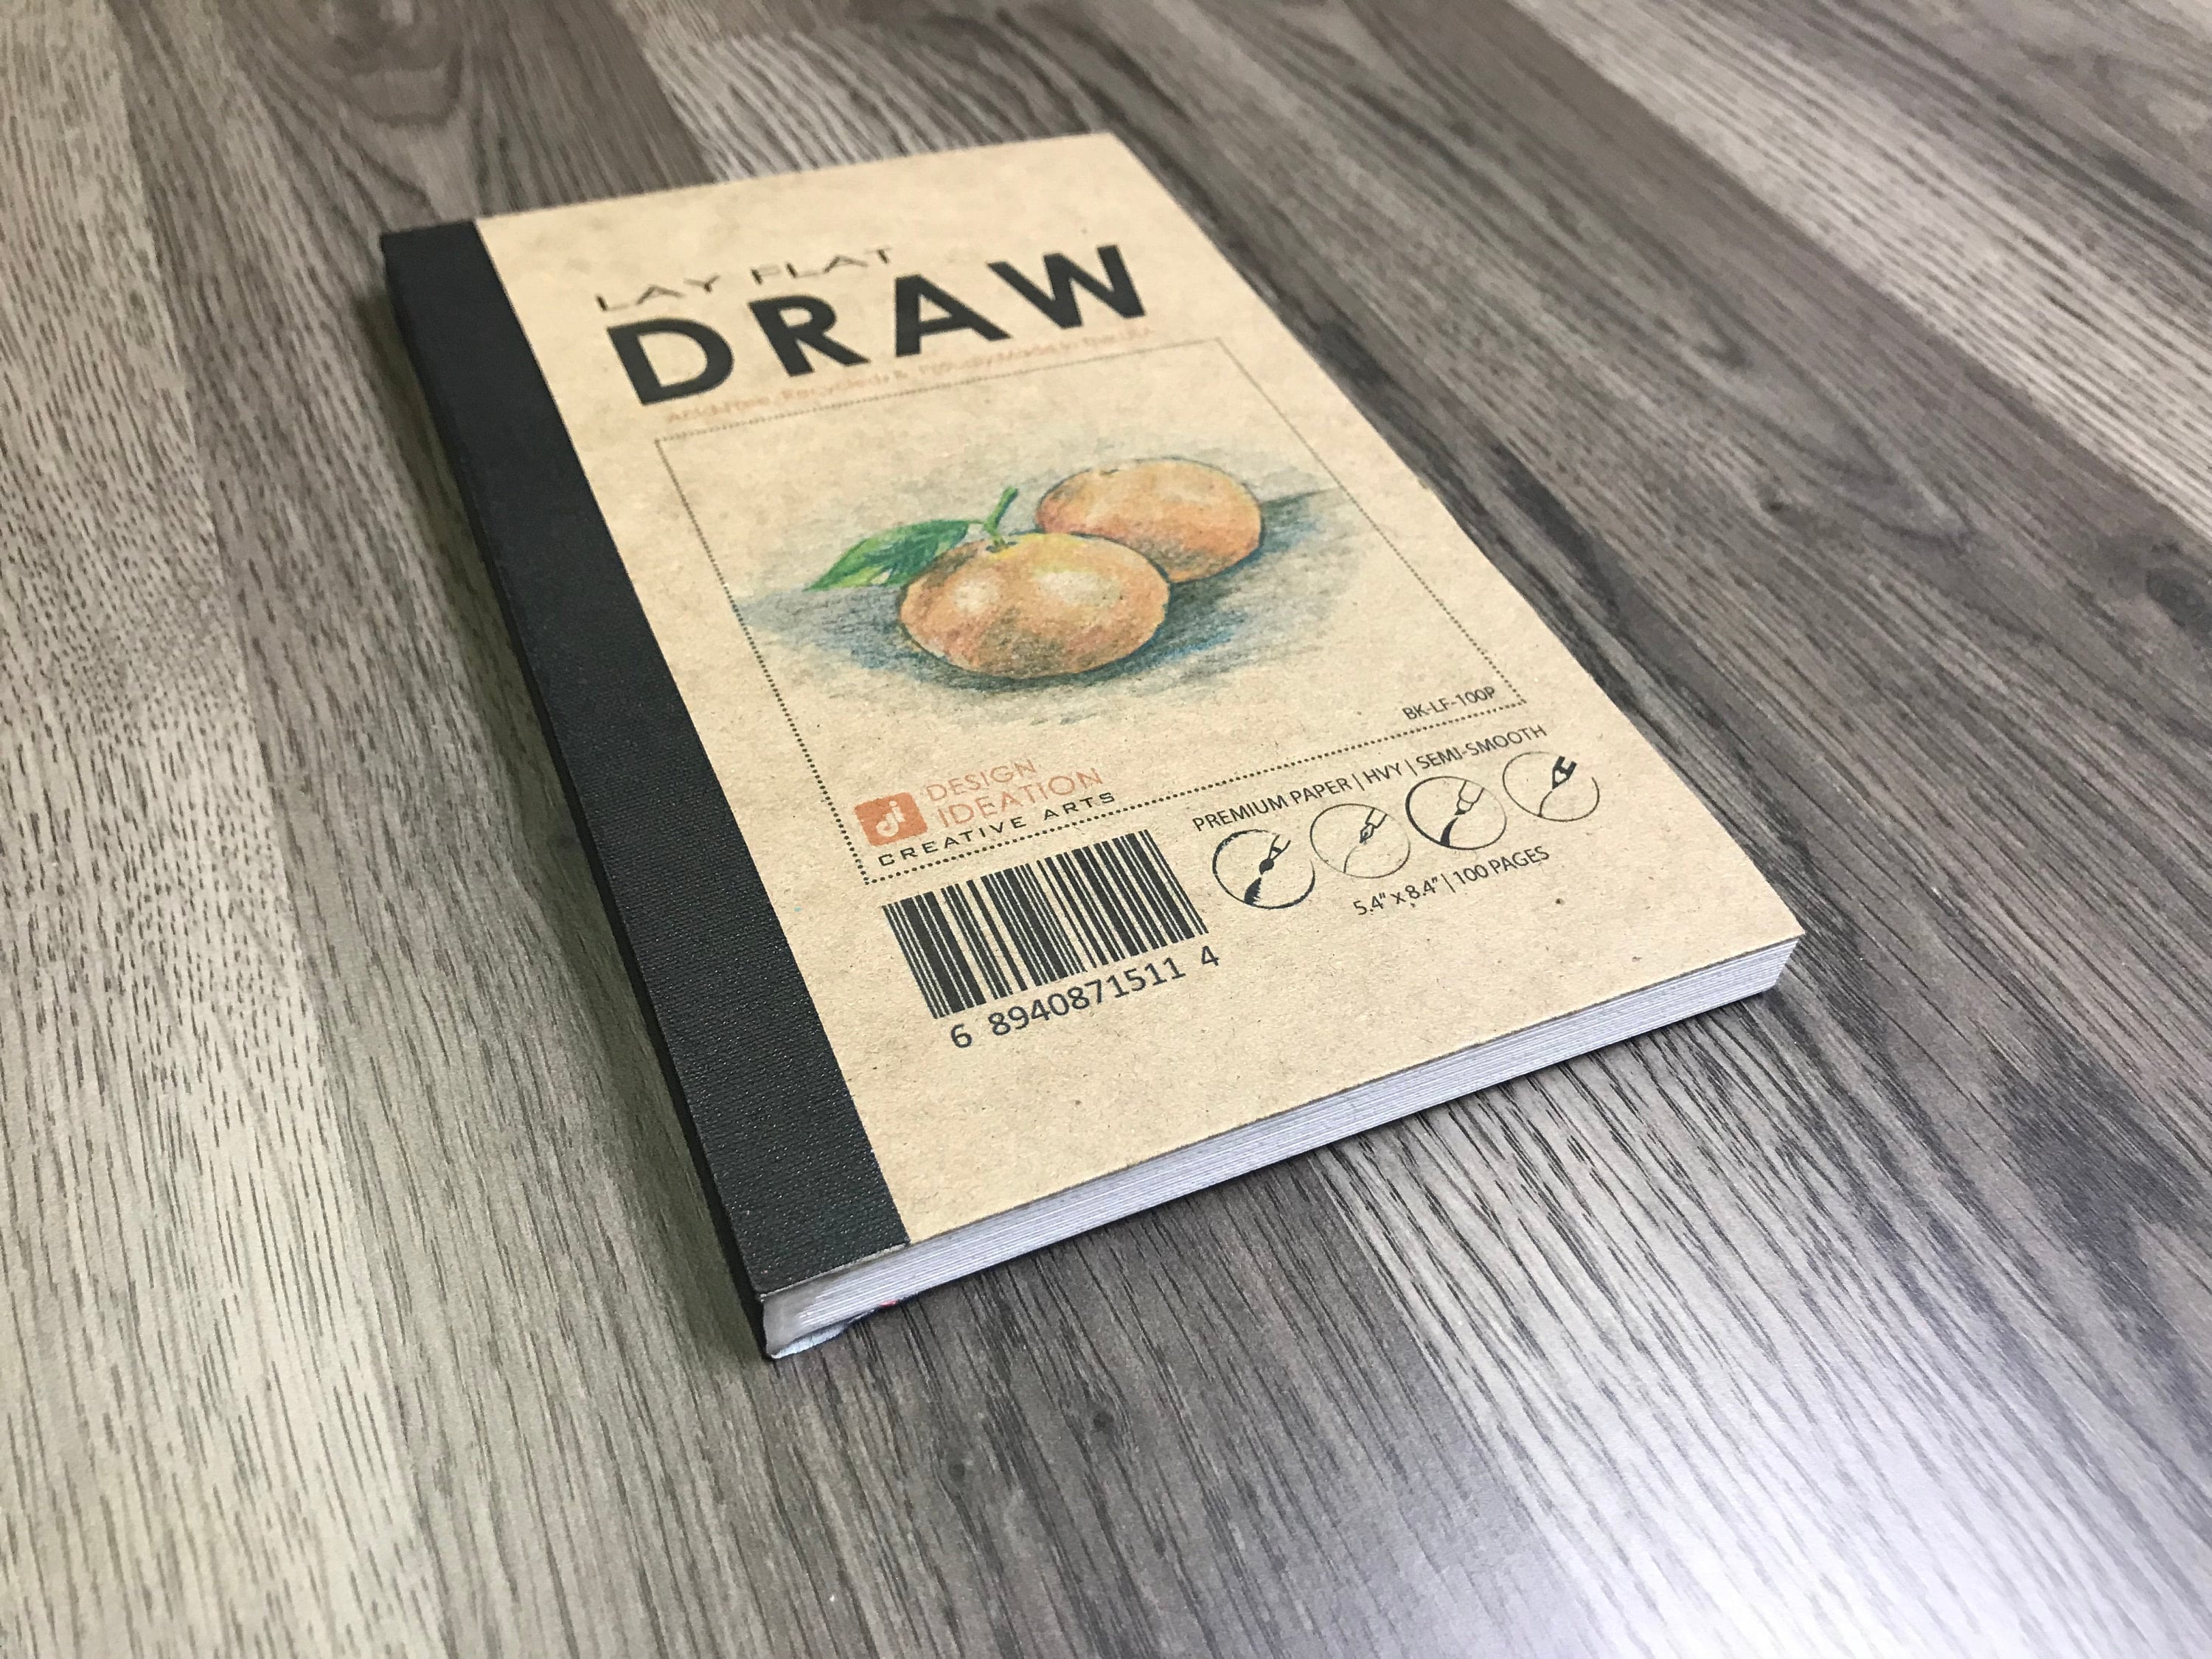 Design Ideation MULTI-MEDIA Sketch Book. Spiral Bound, Heavy Paper Sketchbook for Pencil, Ink, Marker, Charcoal and Watercolor Paints. Great for Art